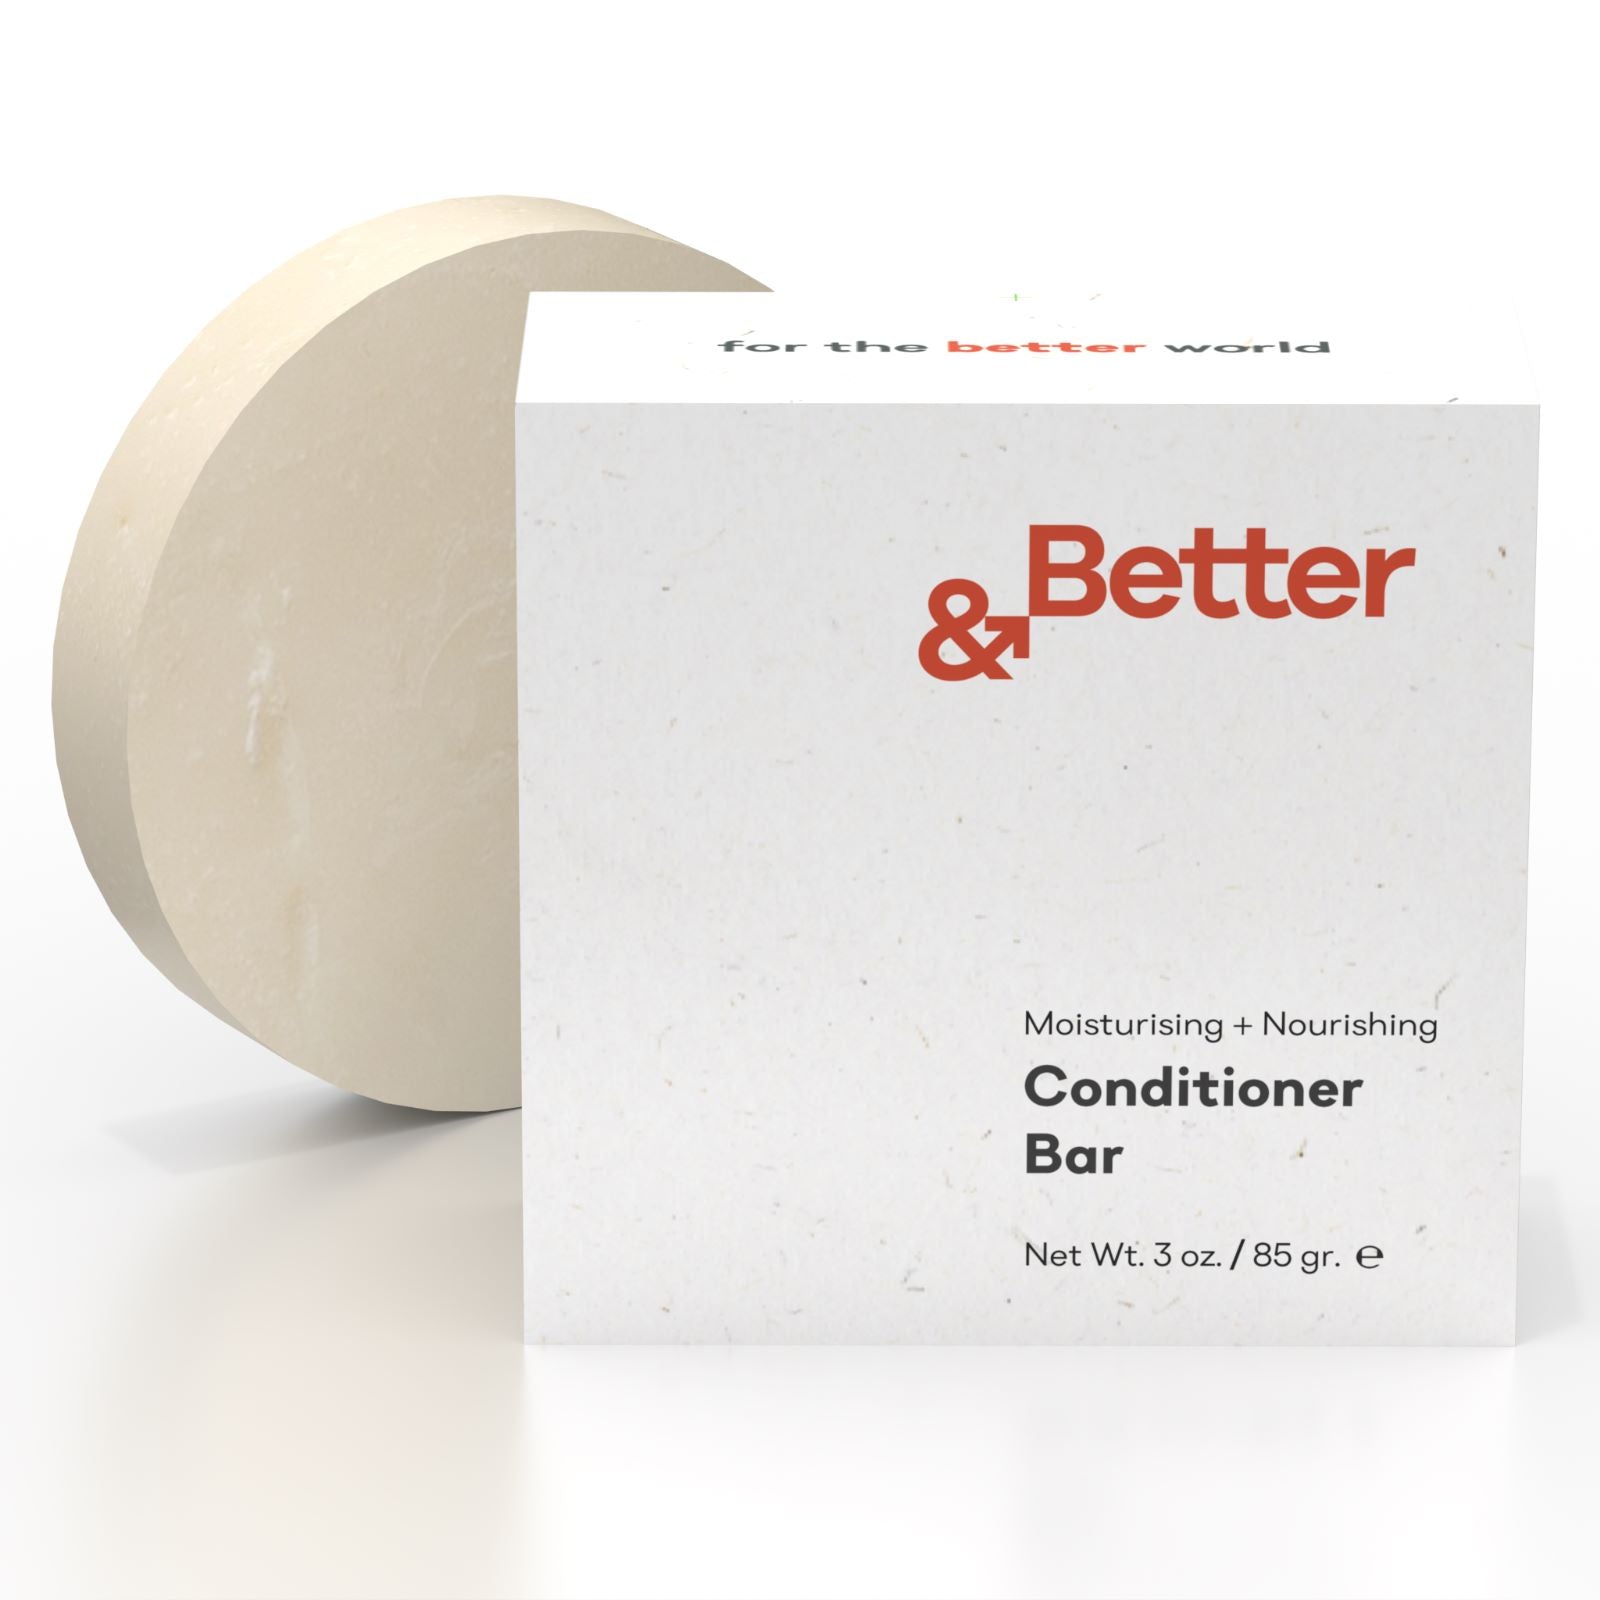 Our all-natural and planet friendly conditioner bar is handcrafted with only the finnest essential ingredients. It&#39;s a nourishing and moisturizing hero that will make your hair lustrous without any fuss. Enjoy the magic touch!